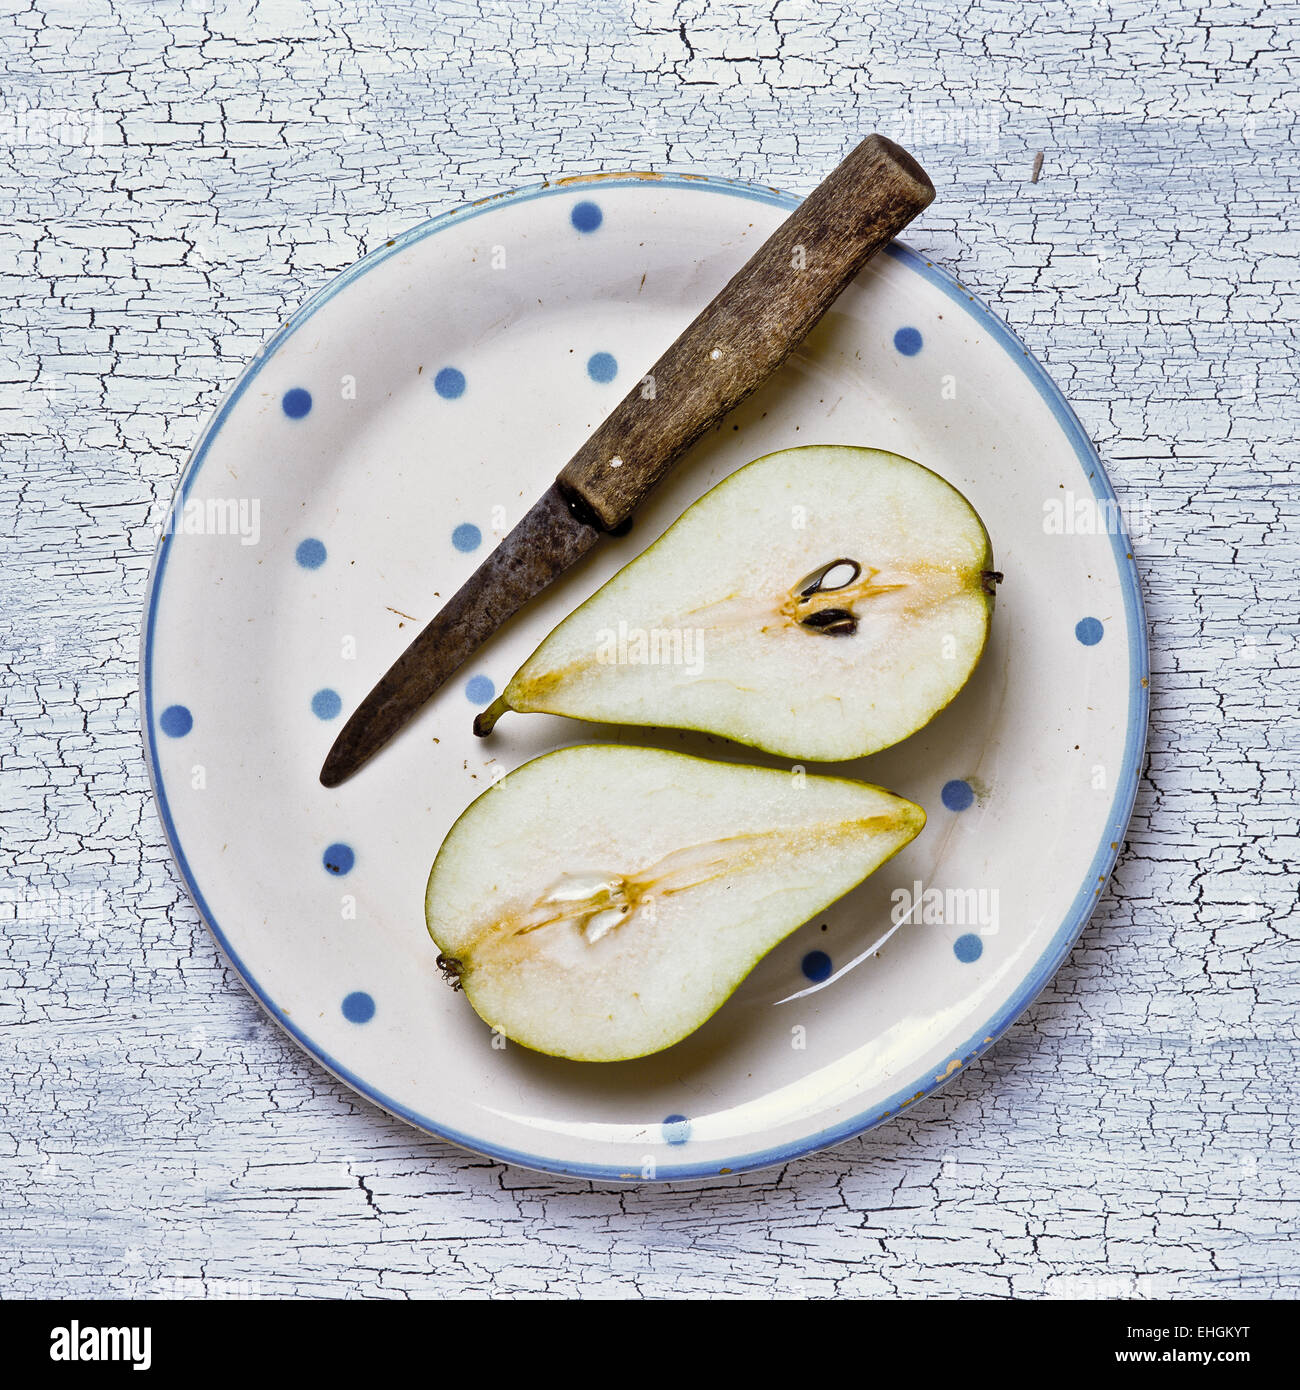 Halved pear and knife on spotted with plate Stock Photo